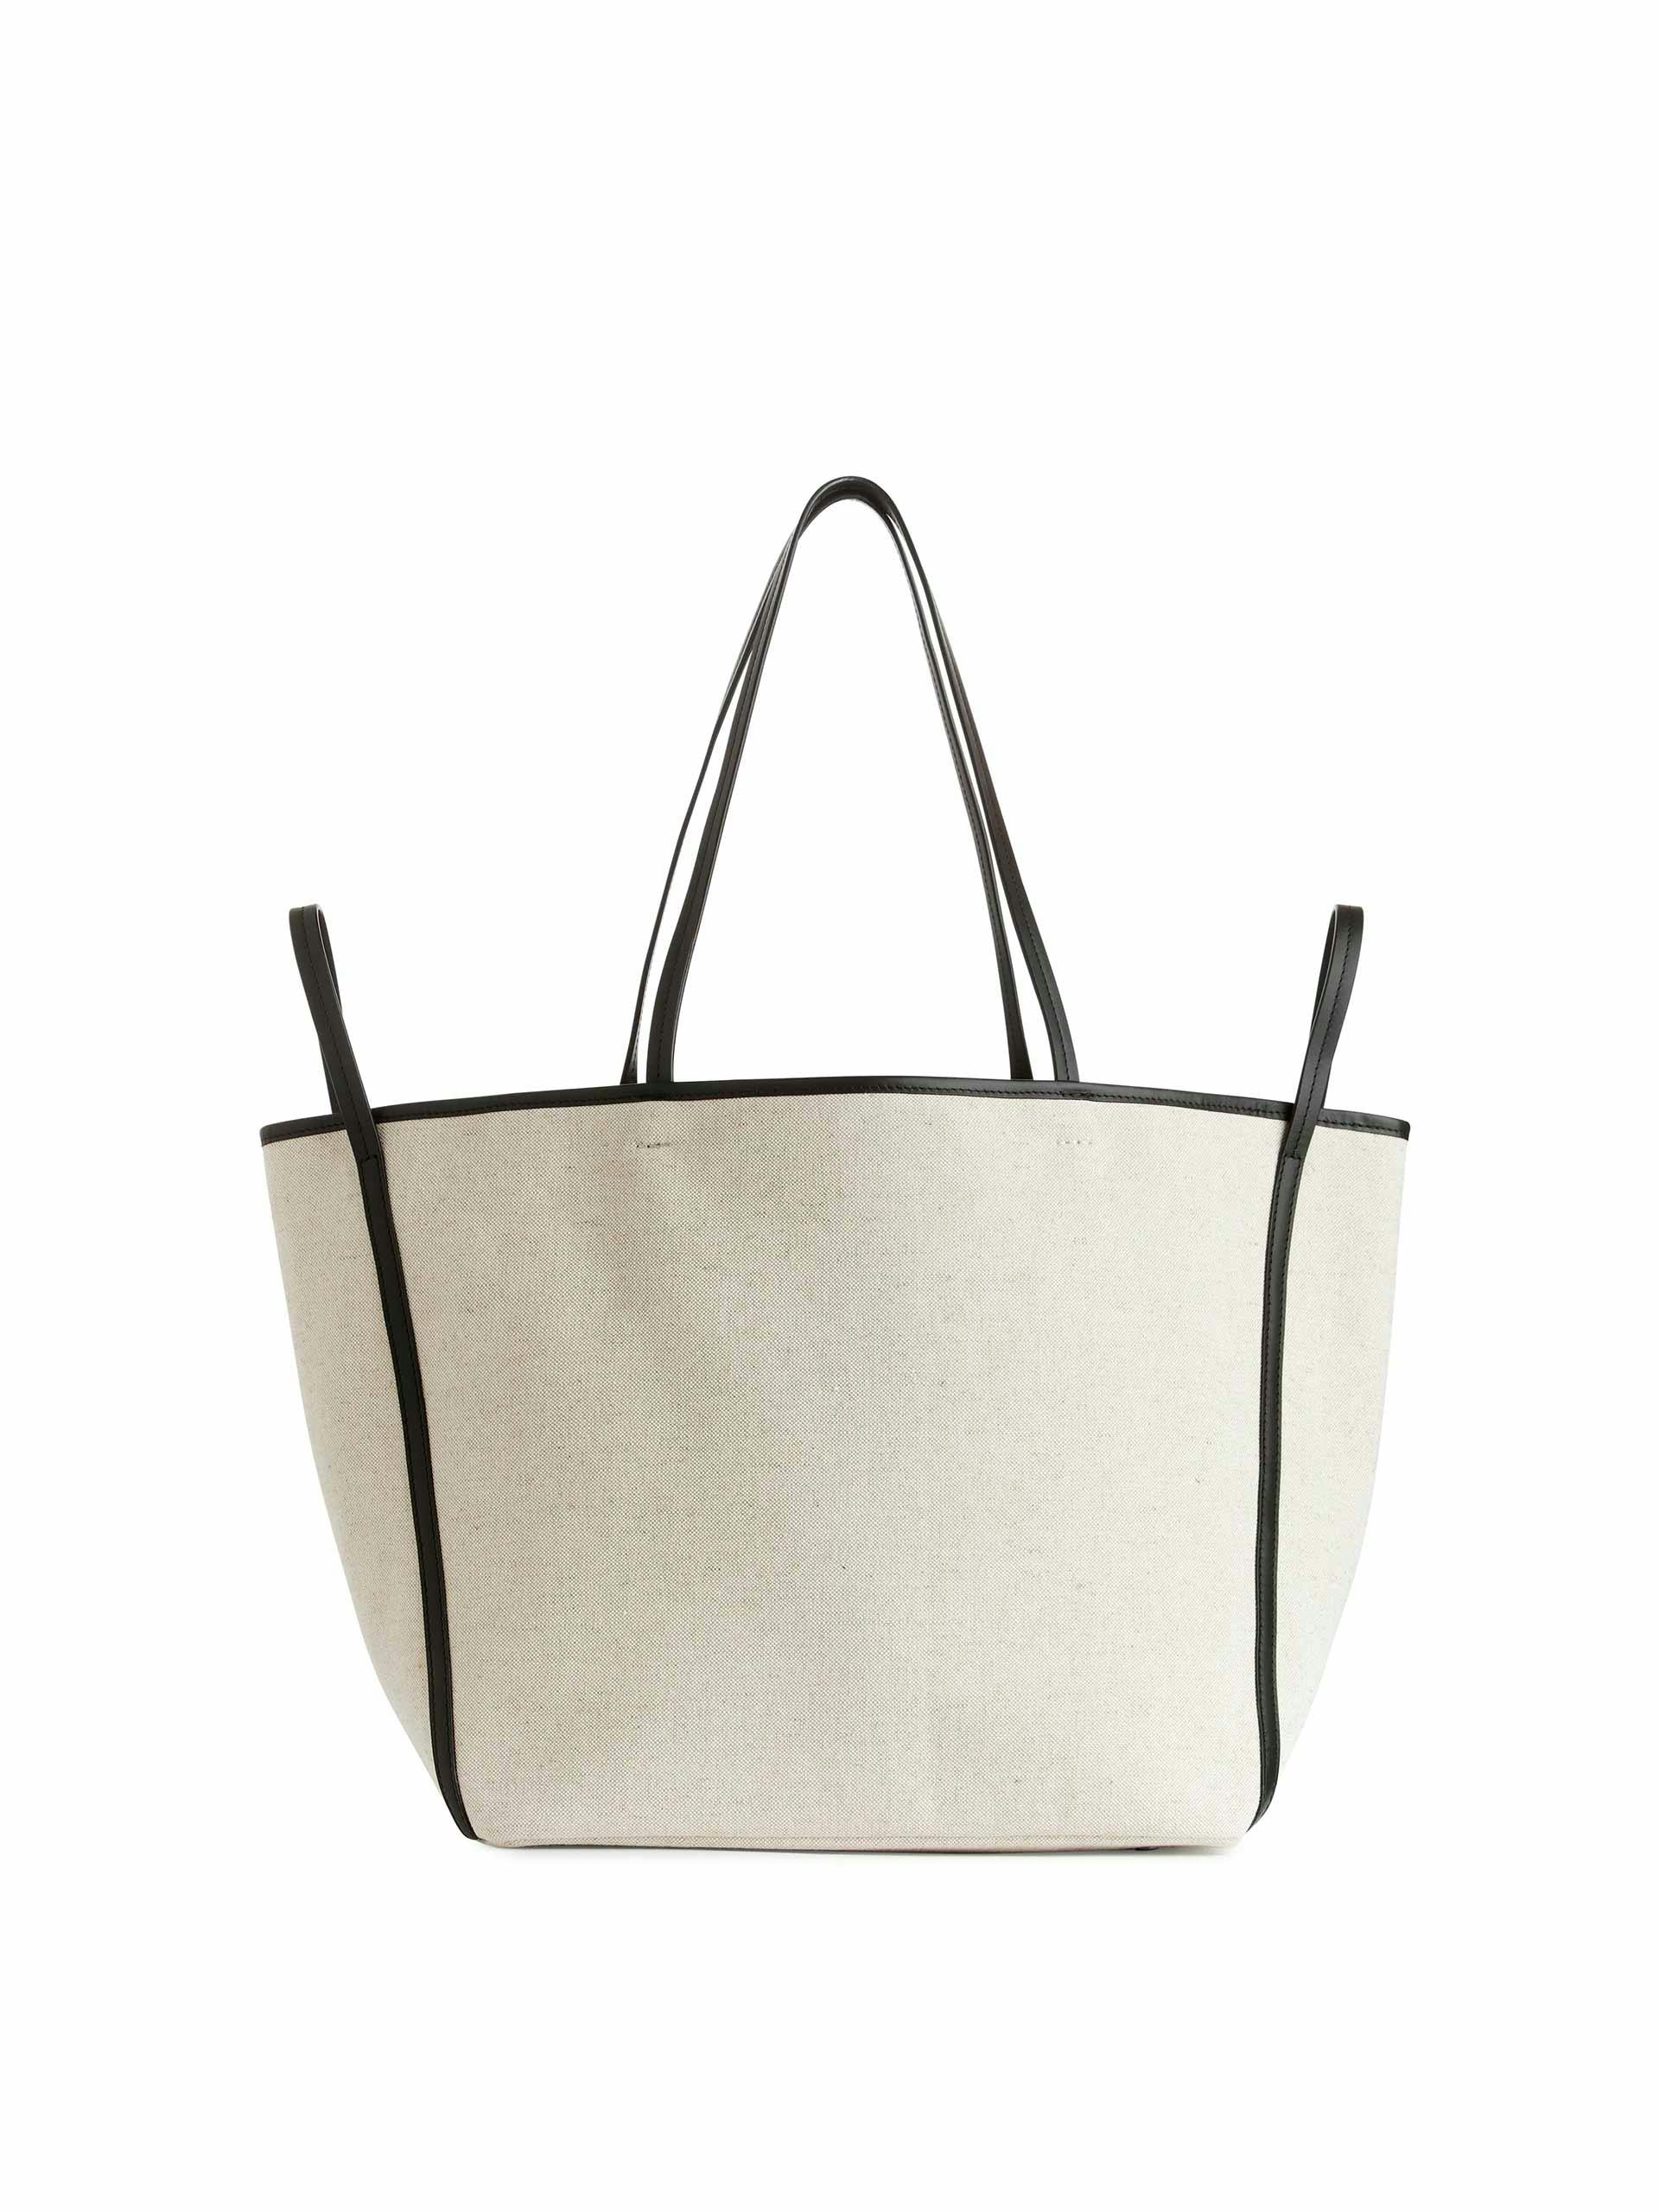 White and leather detailed linen tote bag